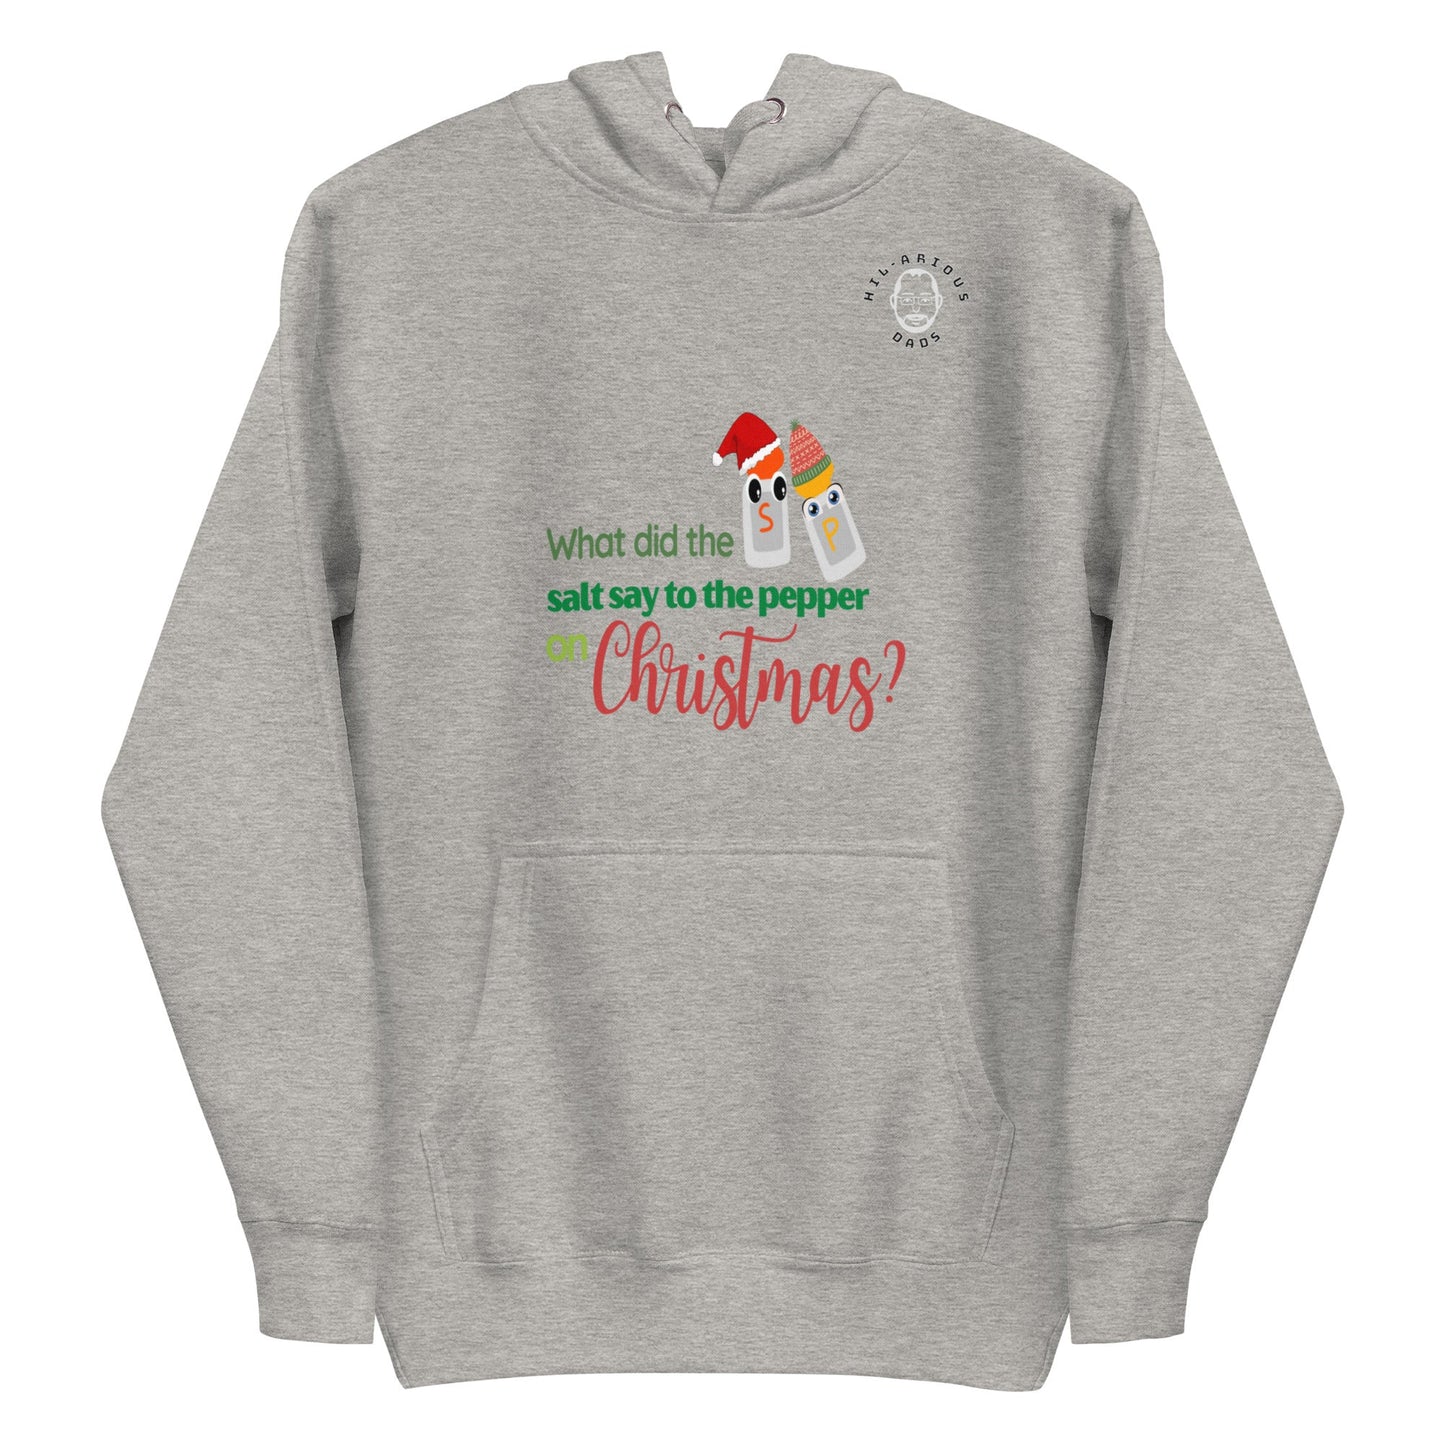 What did the salt say to the pepper on Christmas?-Hoodie - Hil-arious Dads